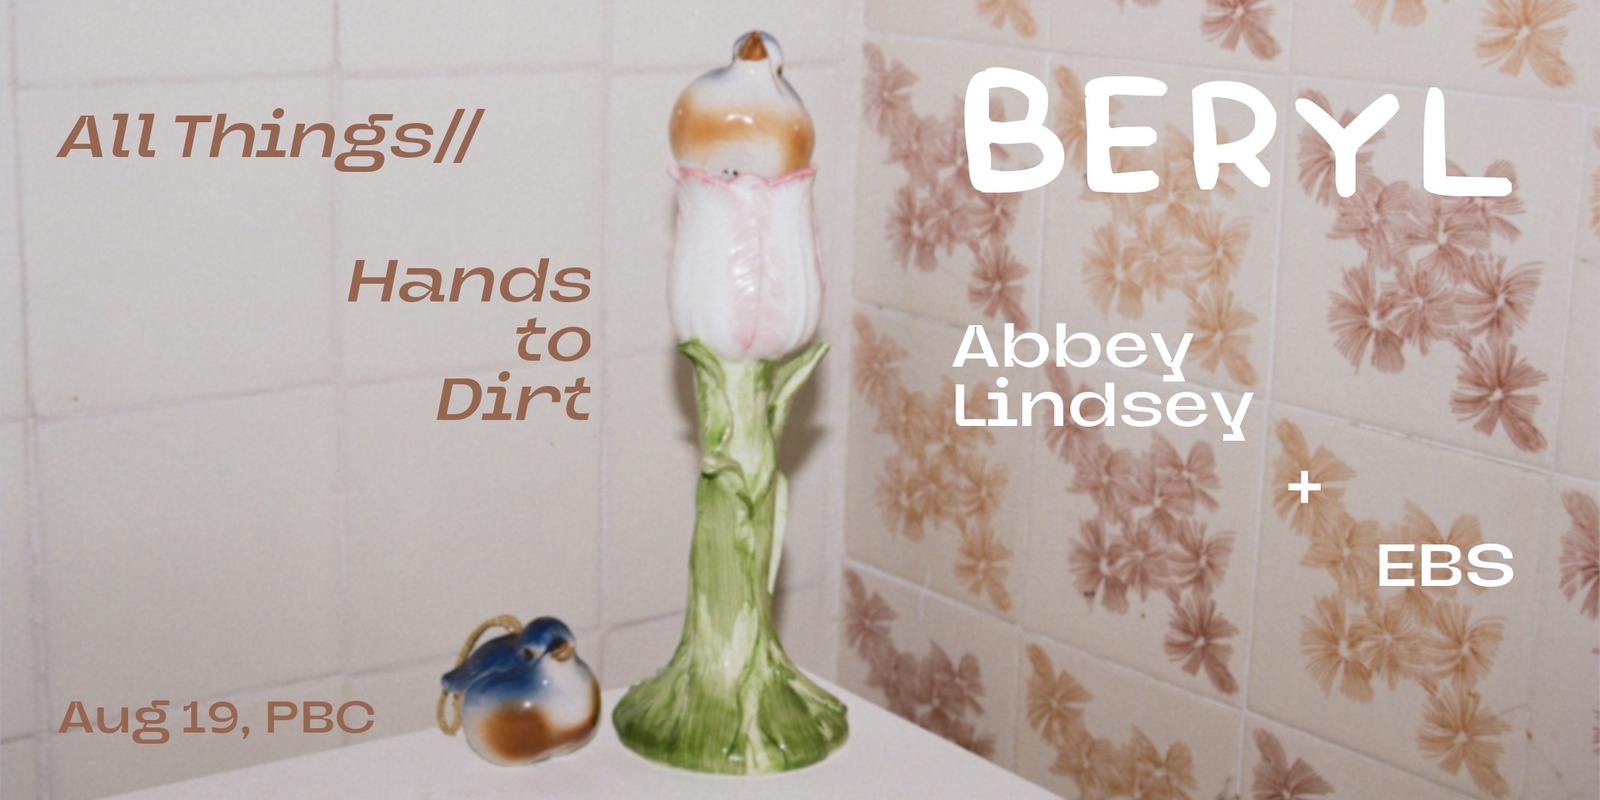 Banner image for Beryl ~ All Things//Hands to Dirt launch